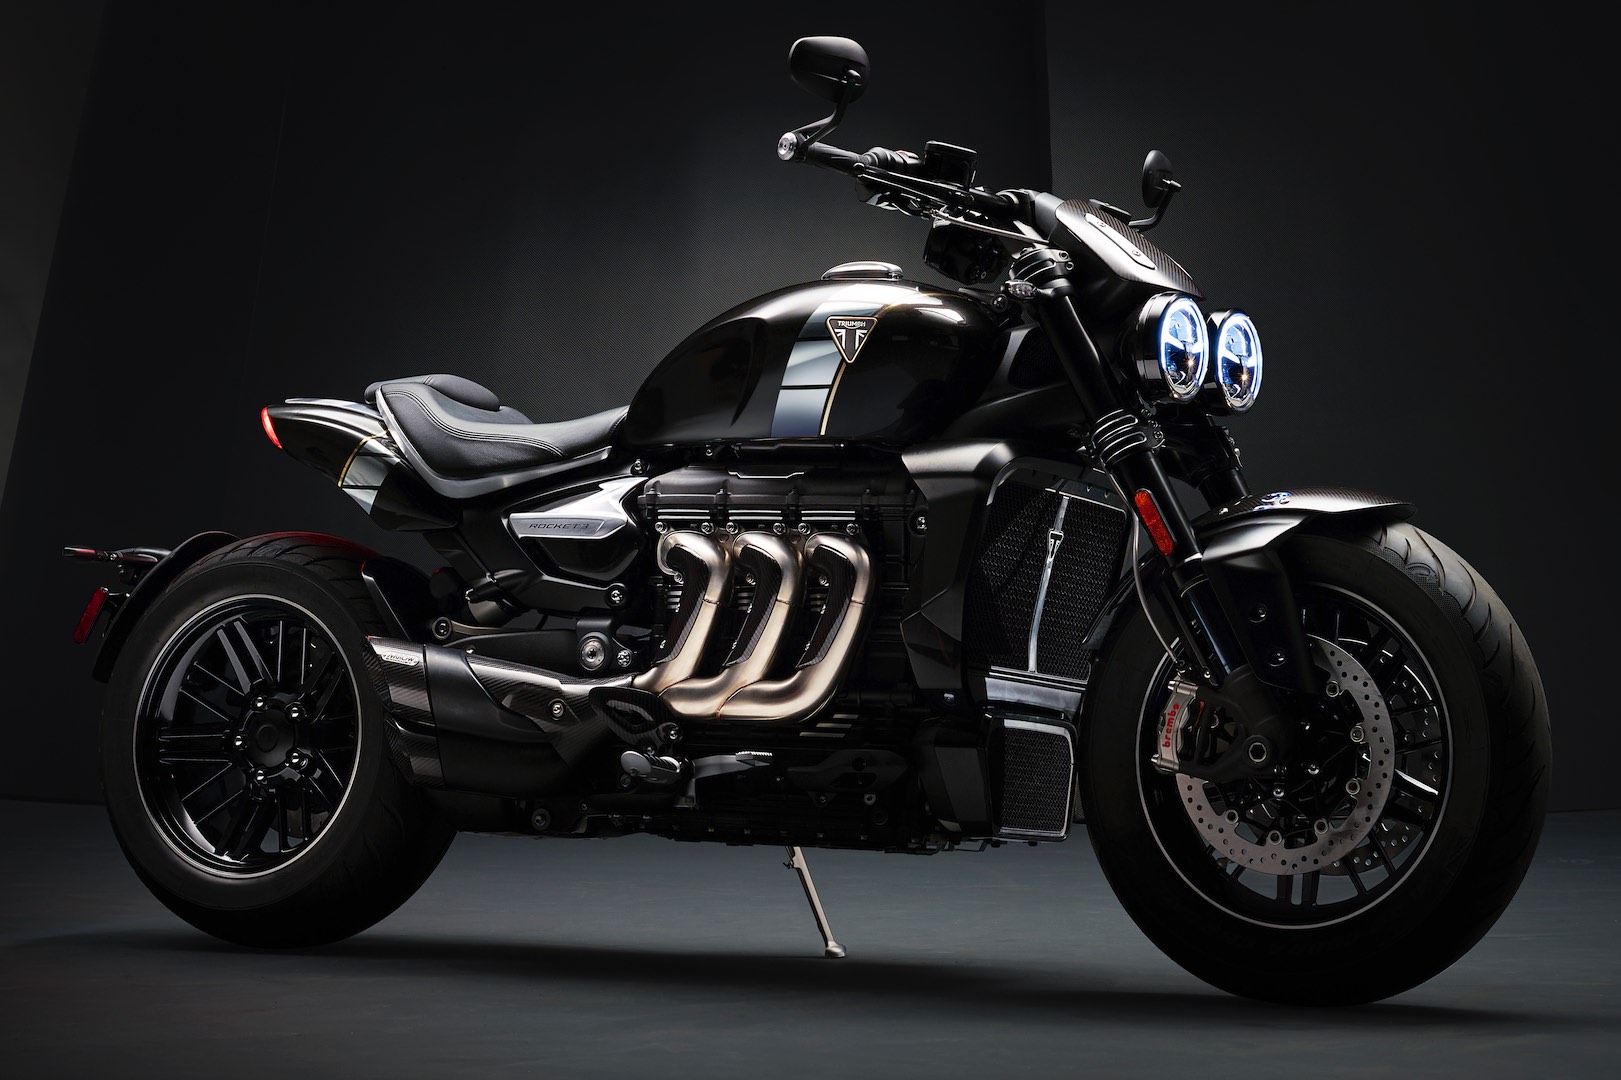 Upcoming Triumph Trident is ready for production and will 